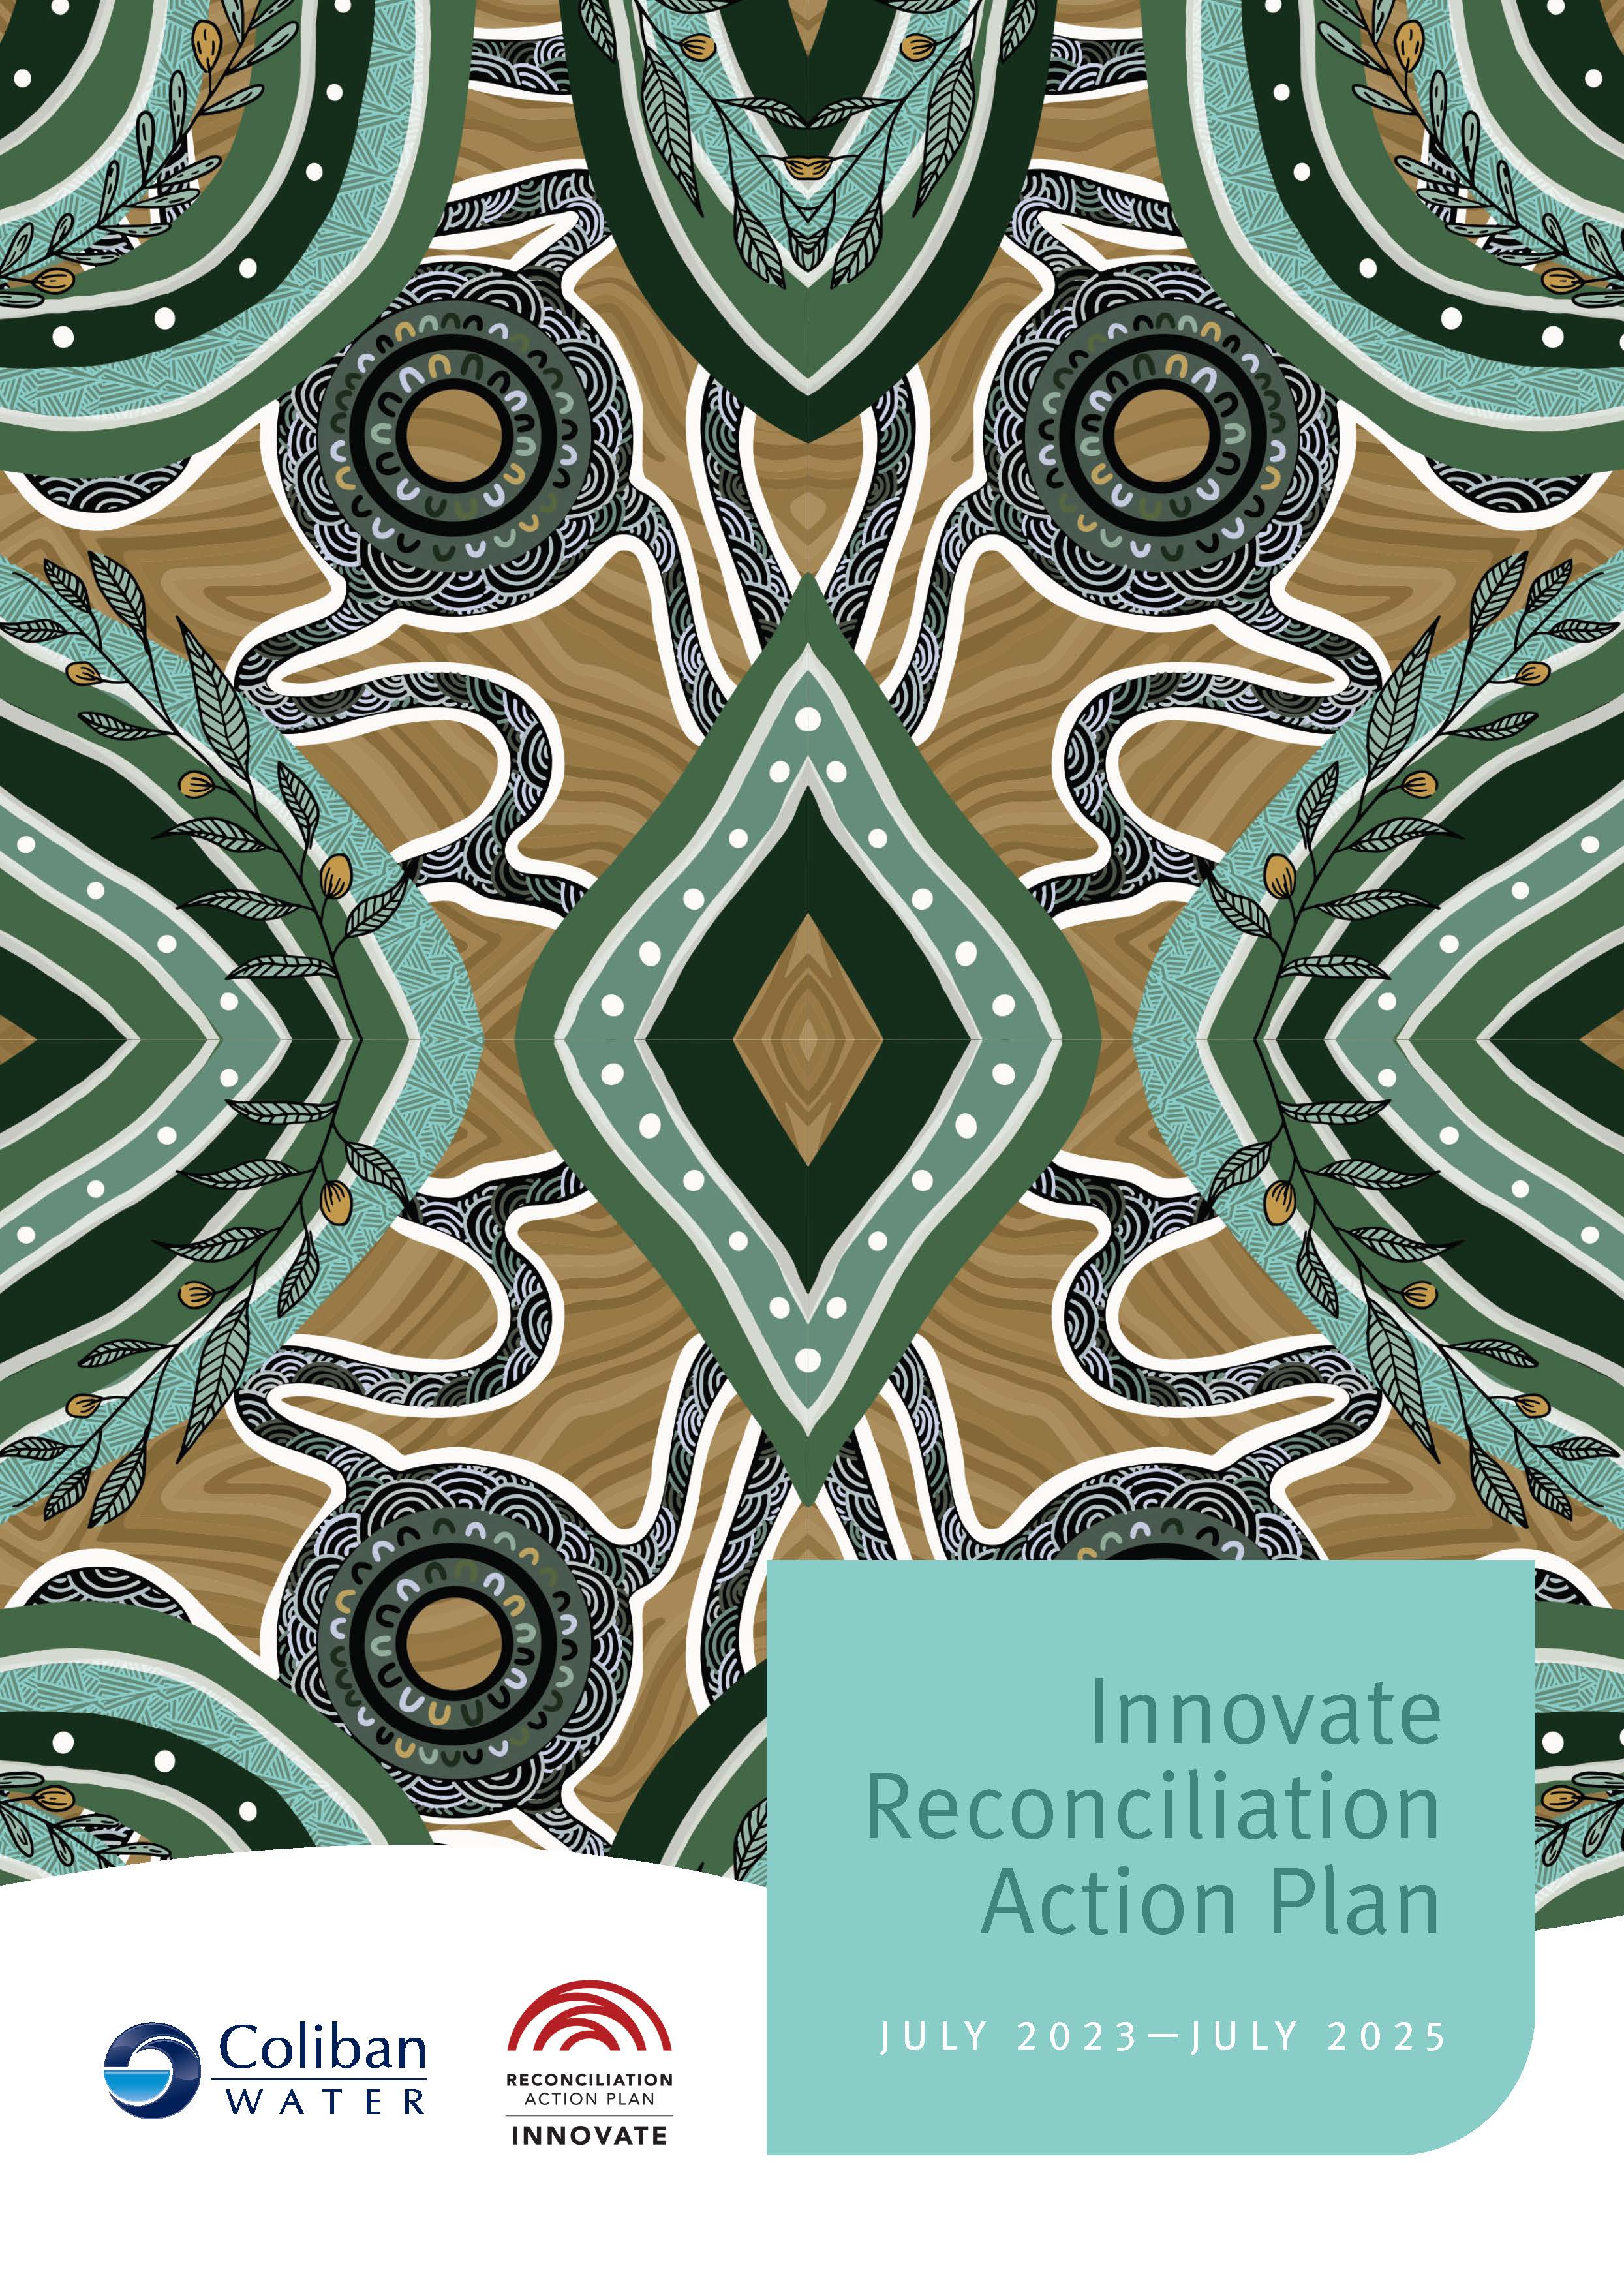 First Nations Artwork by artist Troy Firebrace on the cover of Coliban Waters Innovate Reconciliation Action Plan